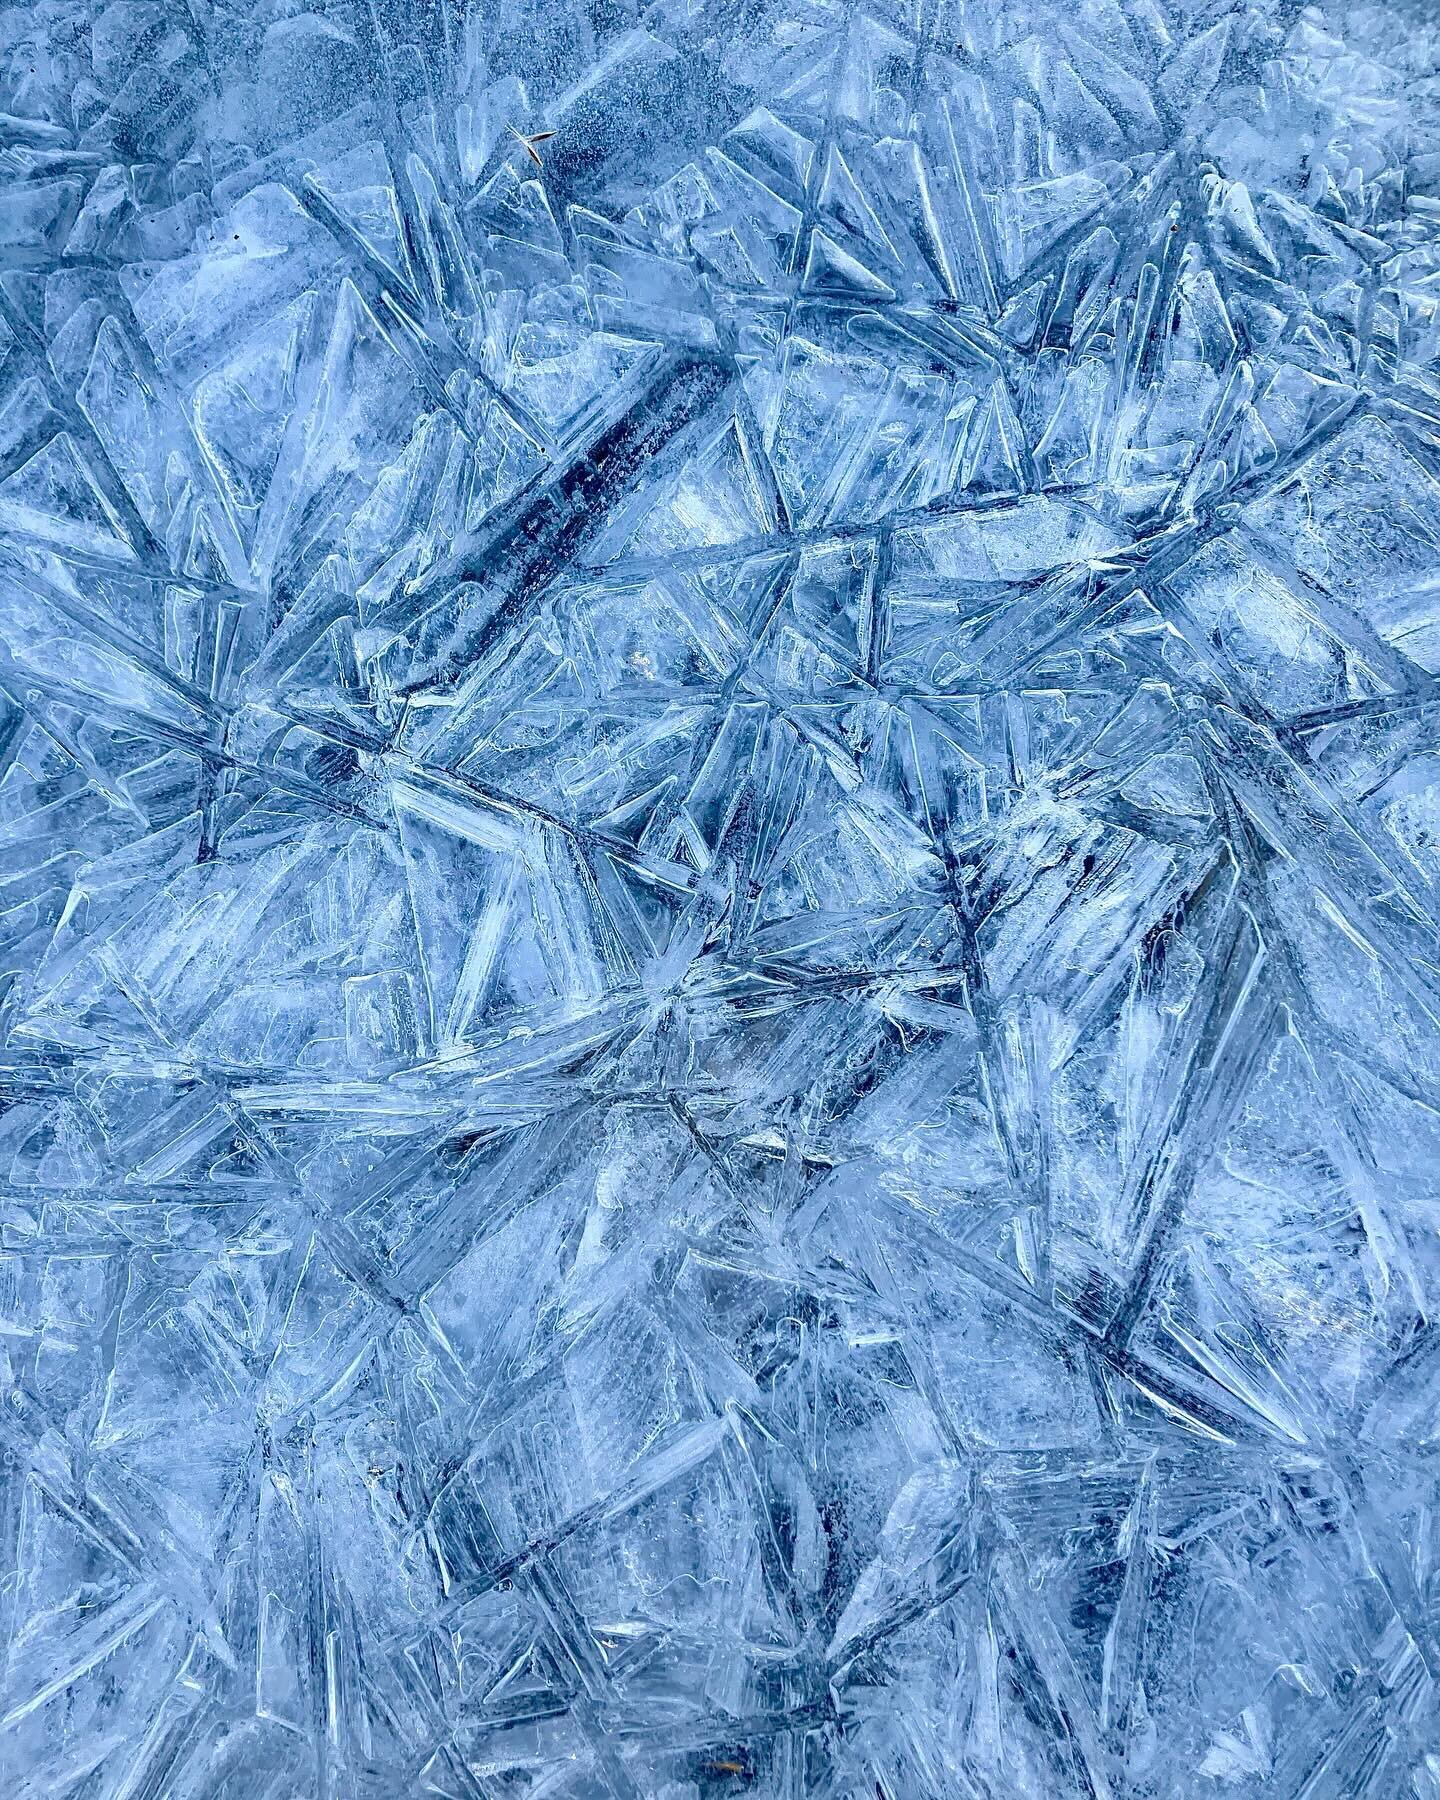 this past week has been frigid 🥶, but one that has been perfect for ice photos 📸❄️🙃

despite frozen fingertips and usually awkwardly leaning over to get these shots, I think the fun in it for me is taking the time to notice all the shapes and patt